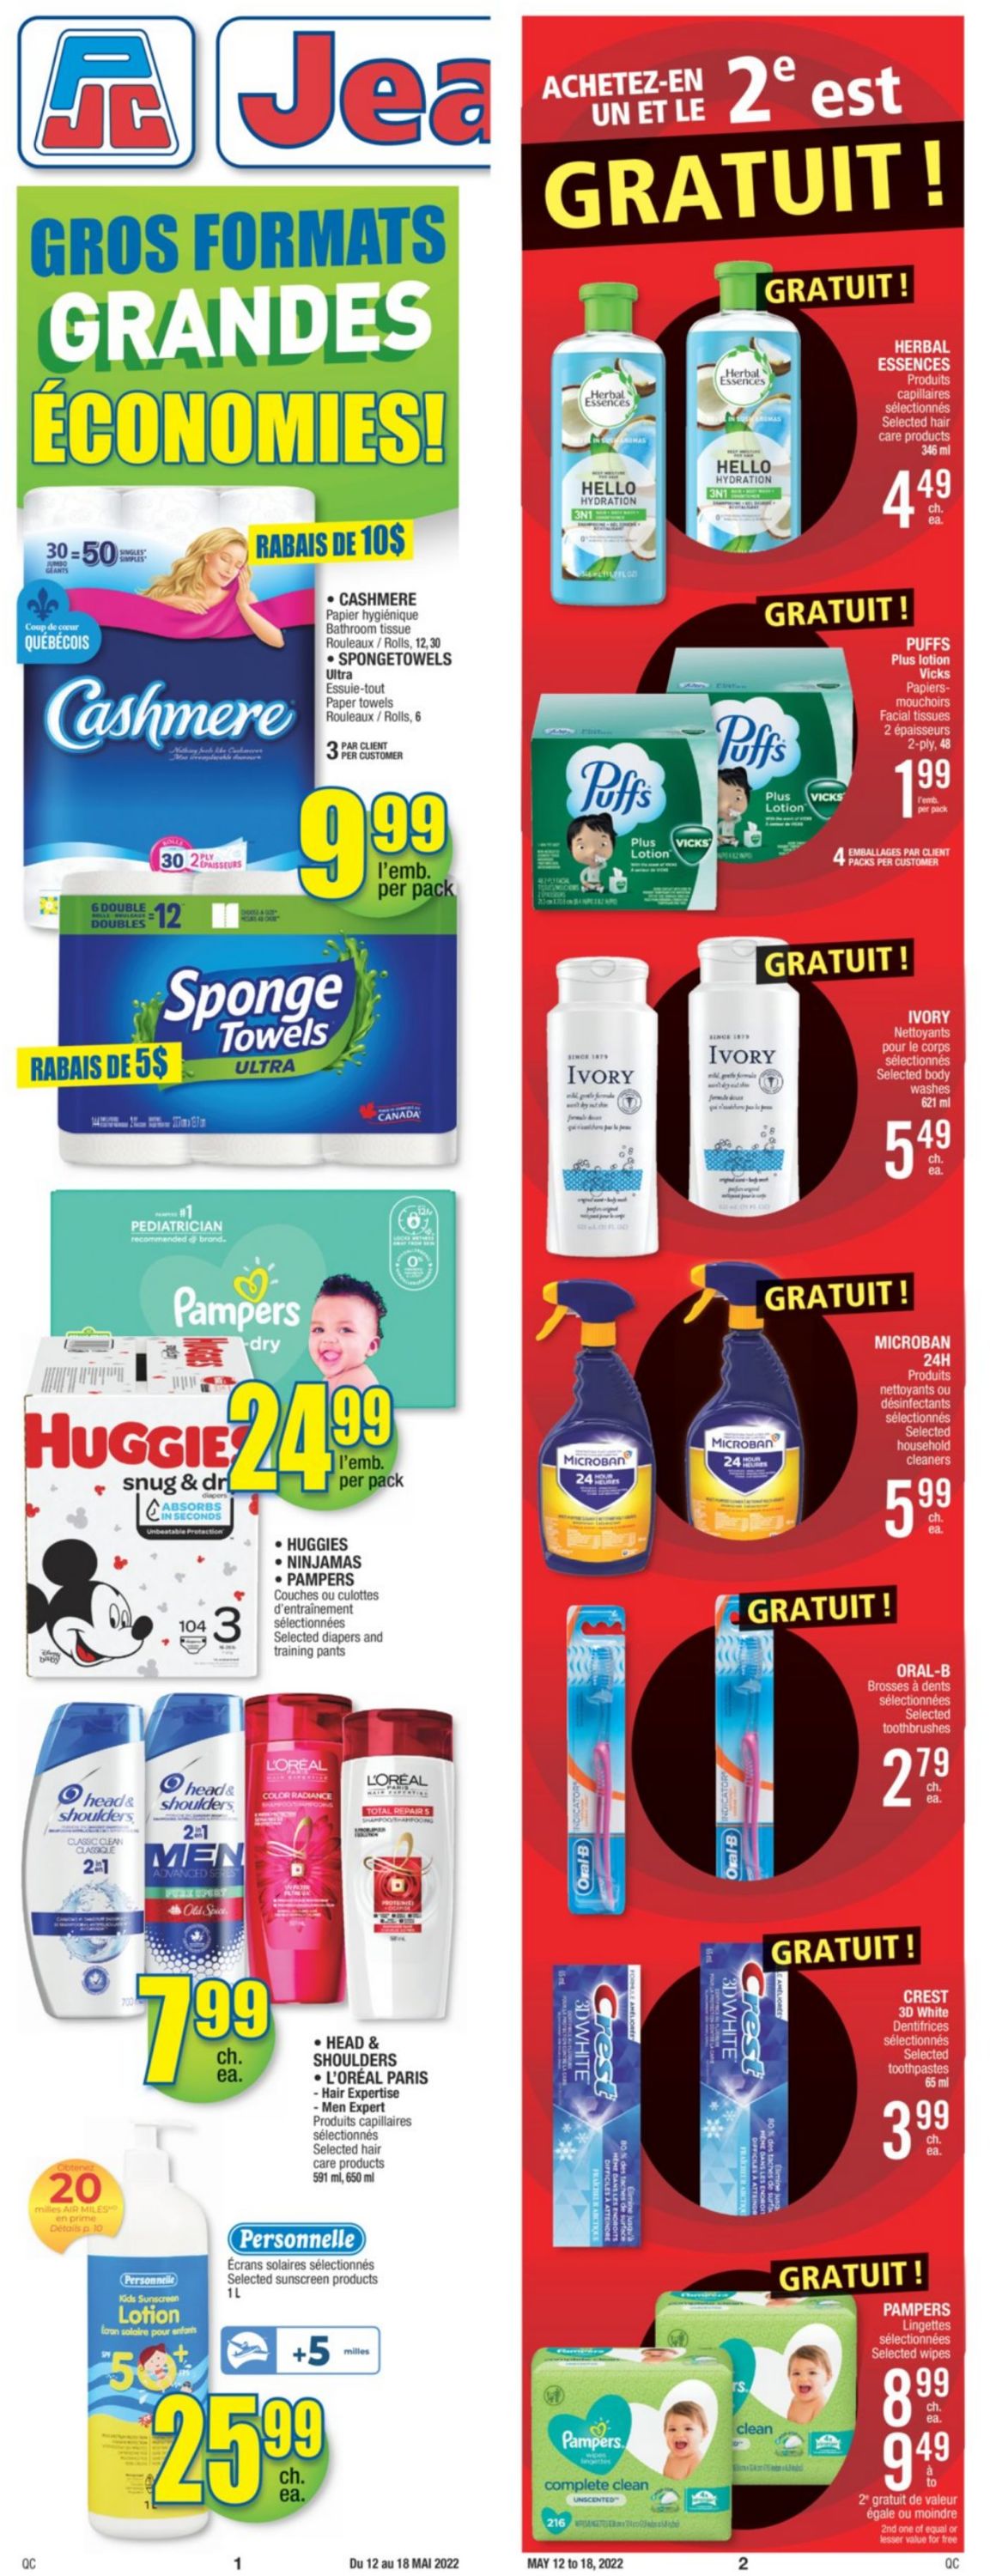 Jean Coutu Flyer from 05/12/2022